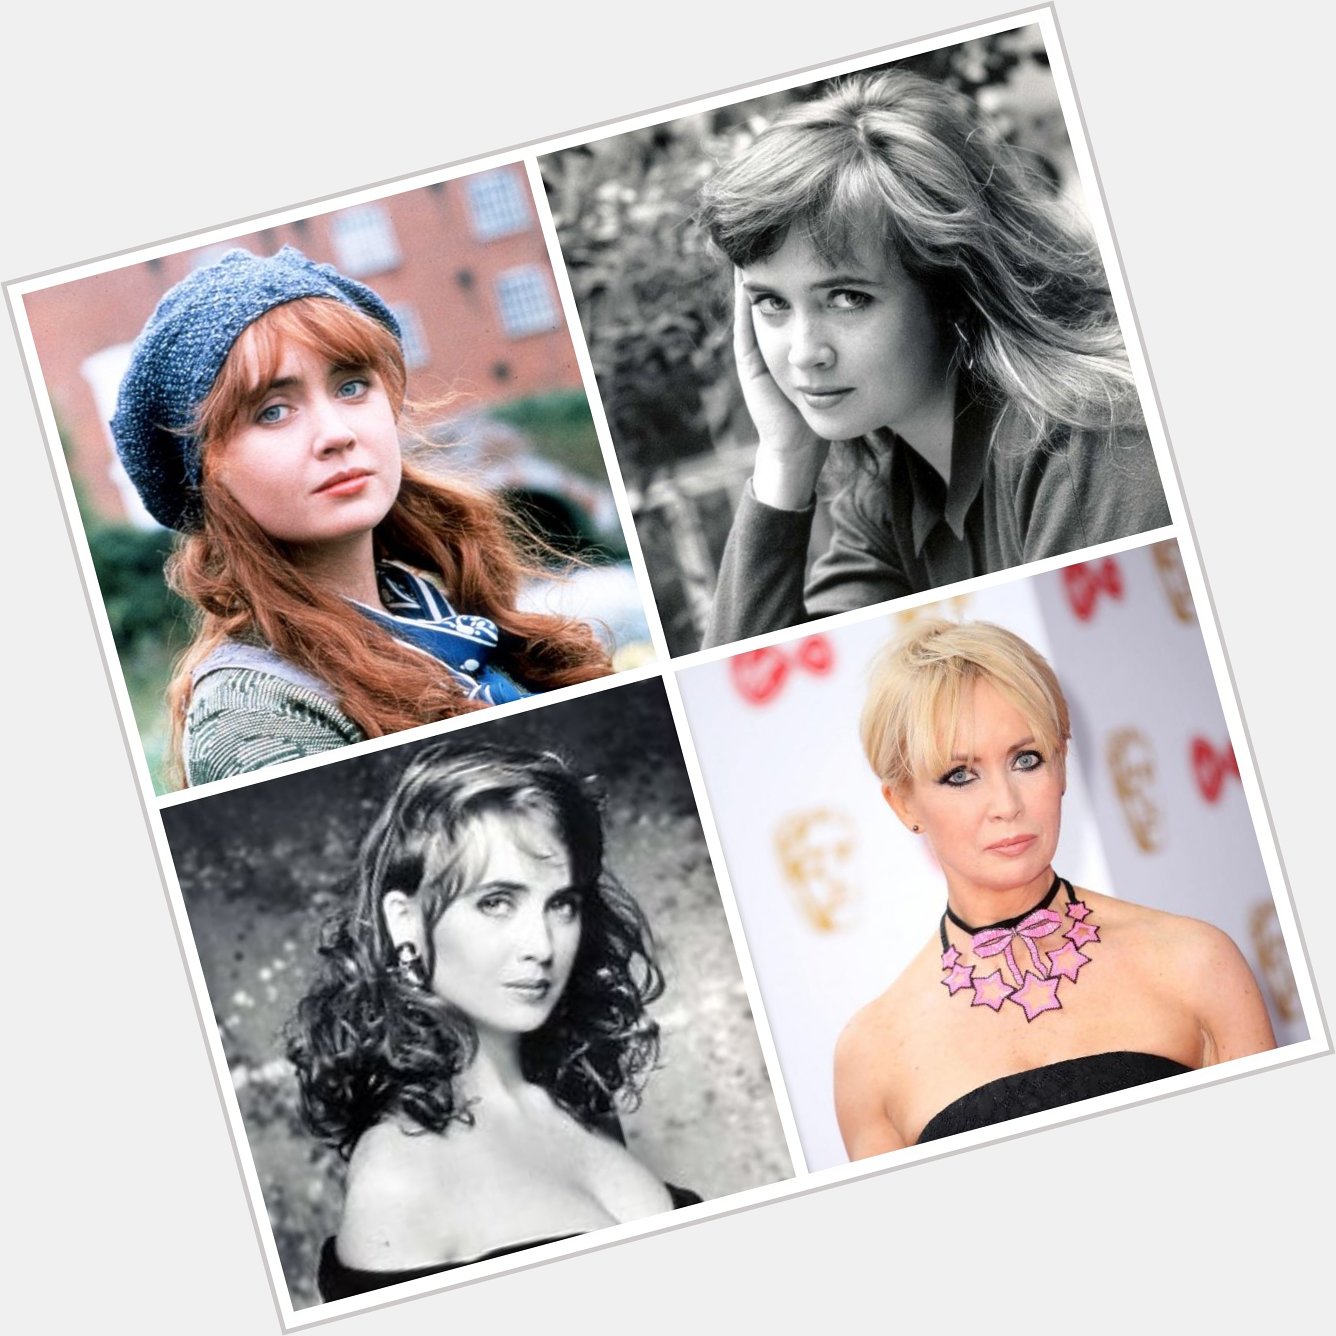 Lysette Anthony is 55 today, Happy Birthday Lysette 